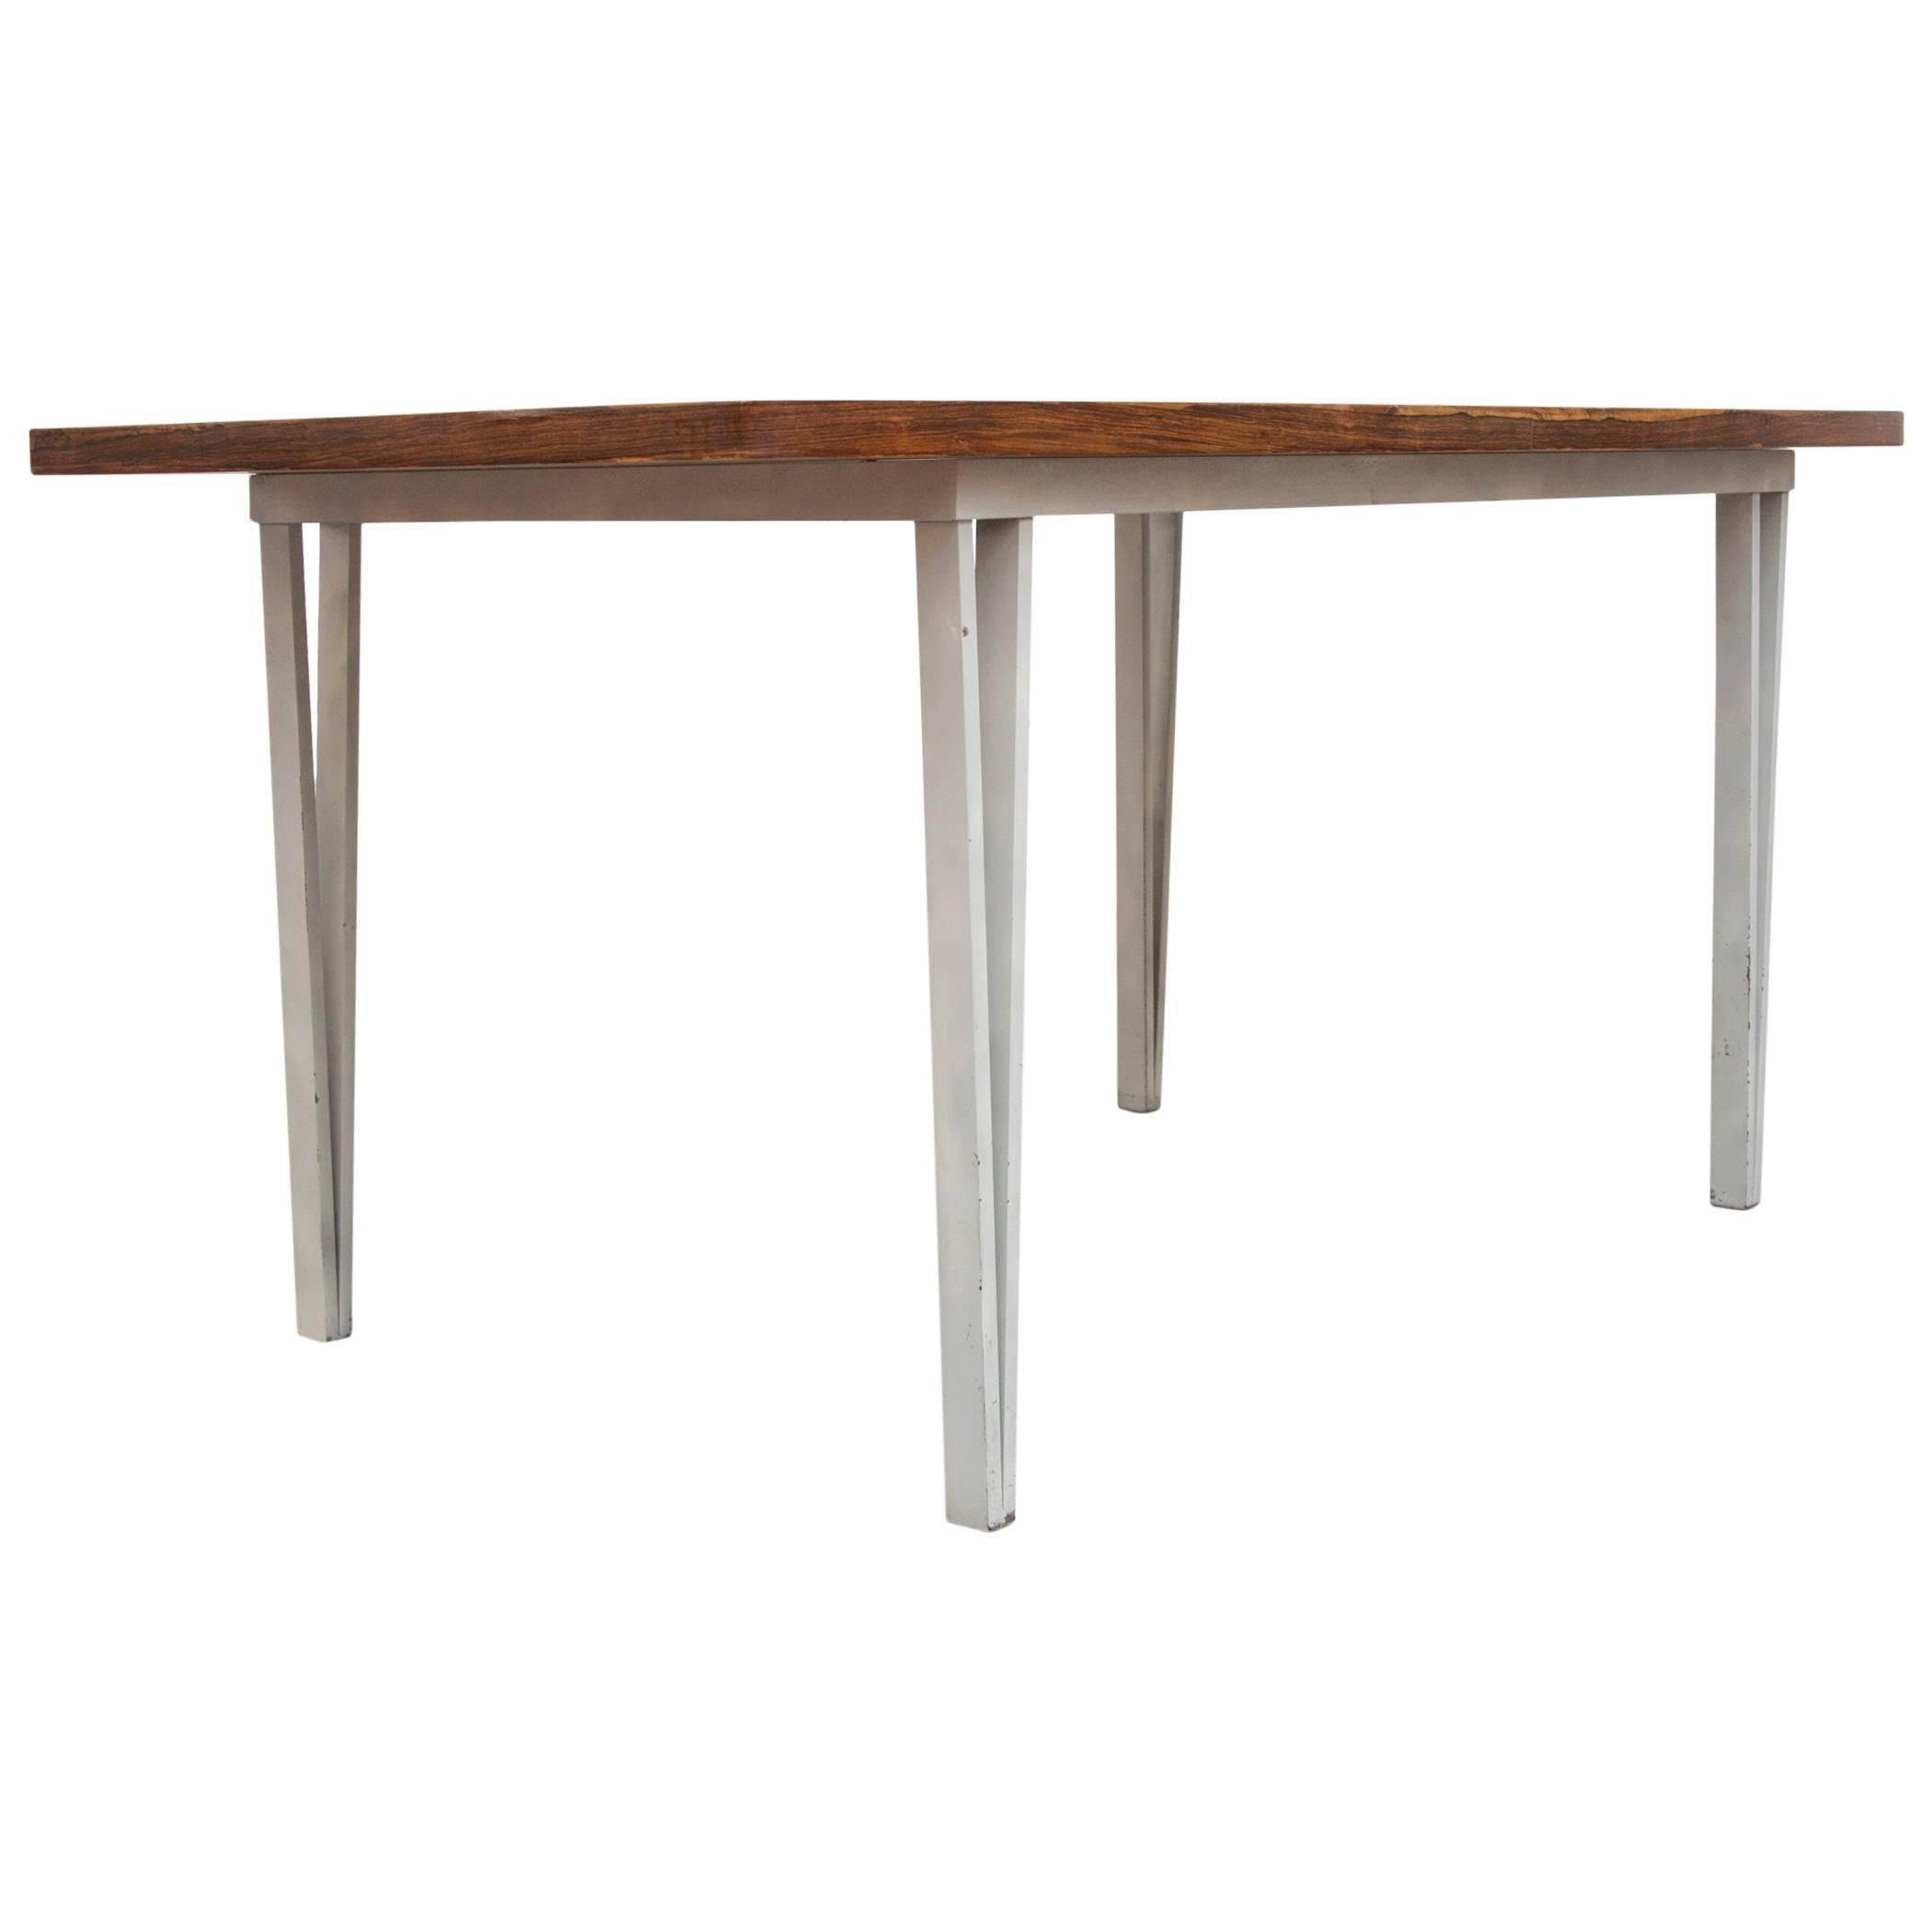 Modern Rosewood Bowed Top Dining Table with White Geometric Metal Frame